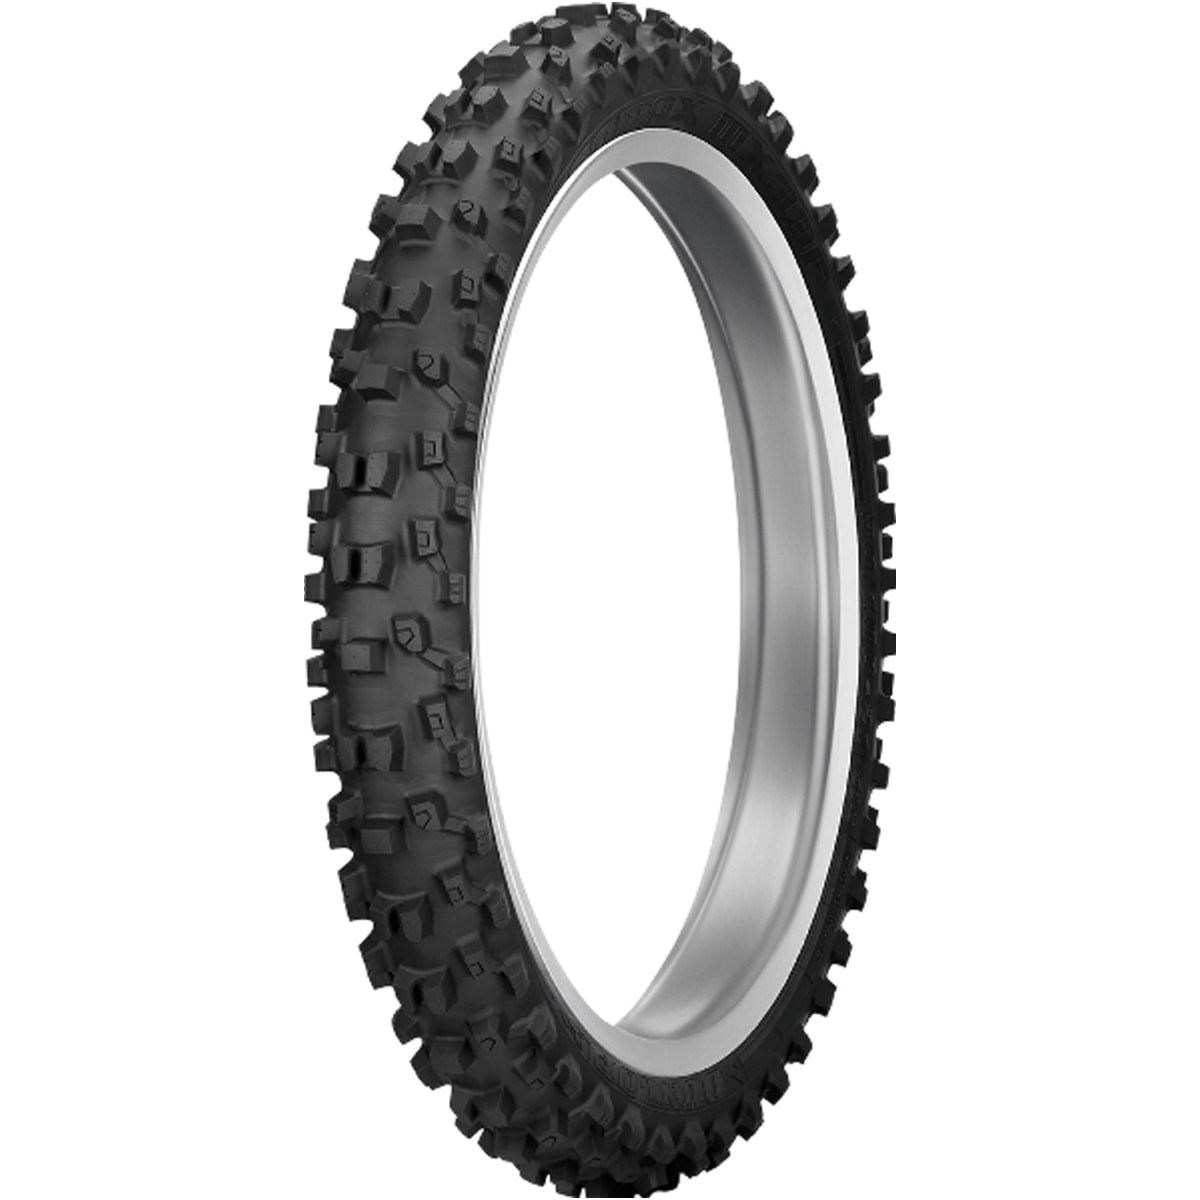 Dunlop Geomax MX33 19" Front Off-Road Tires-0312